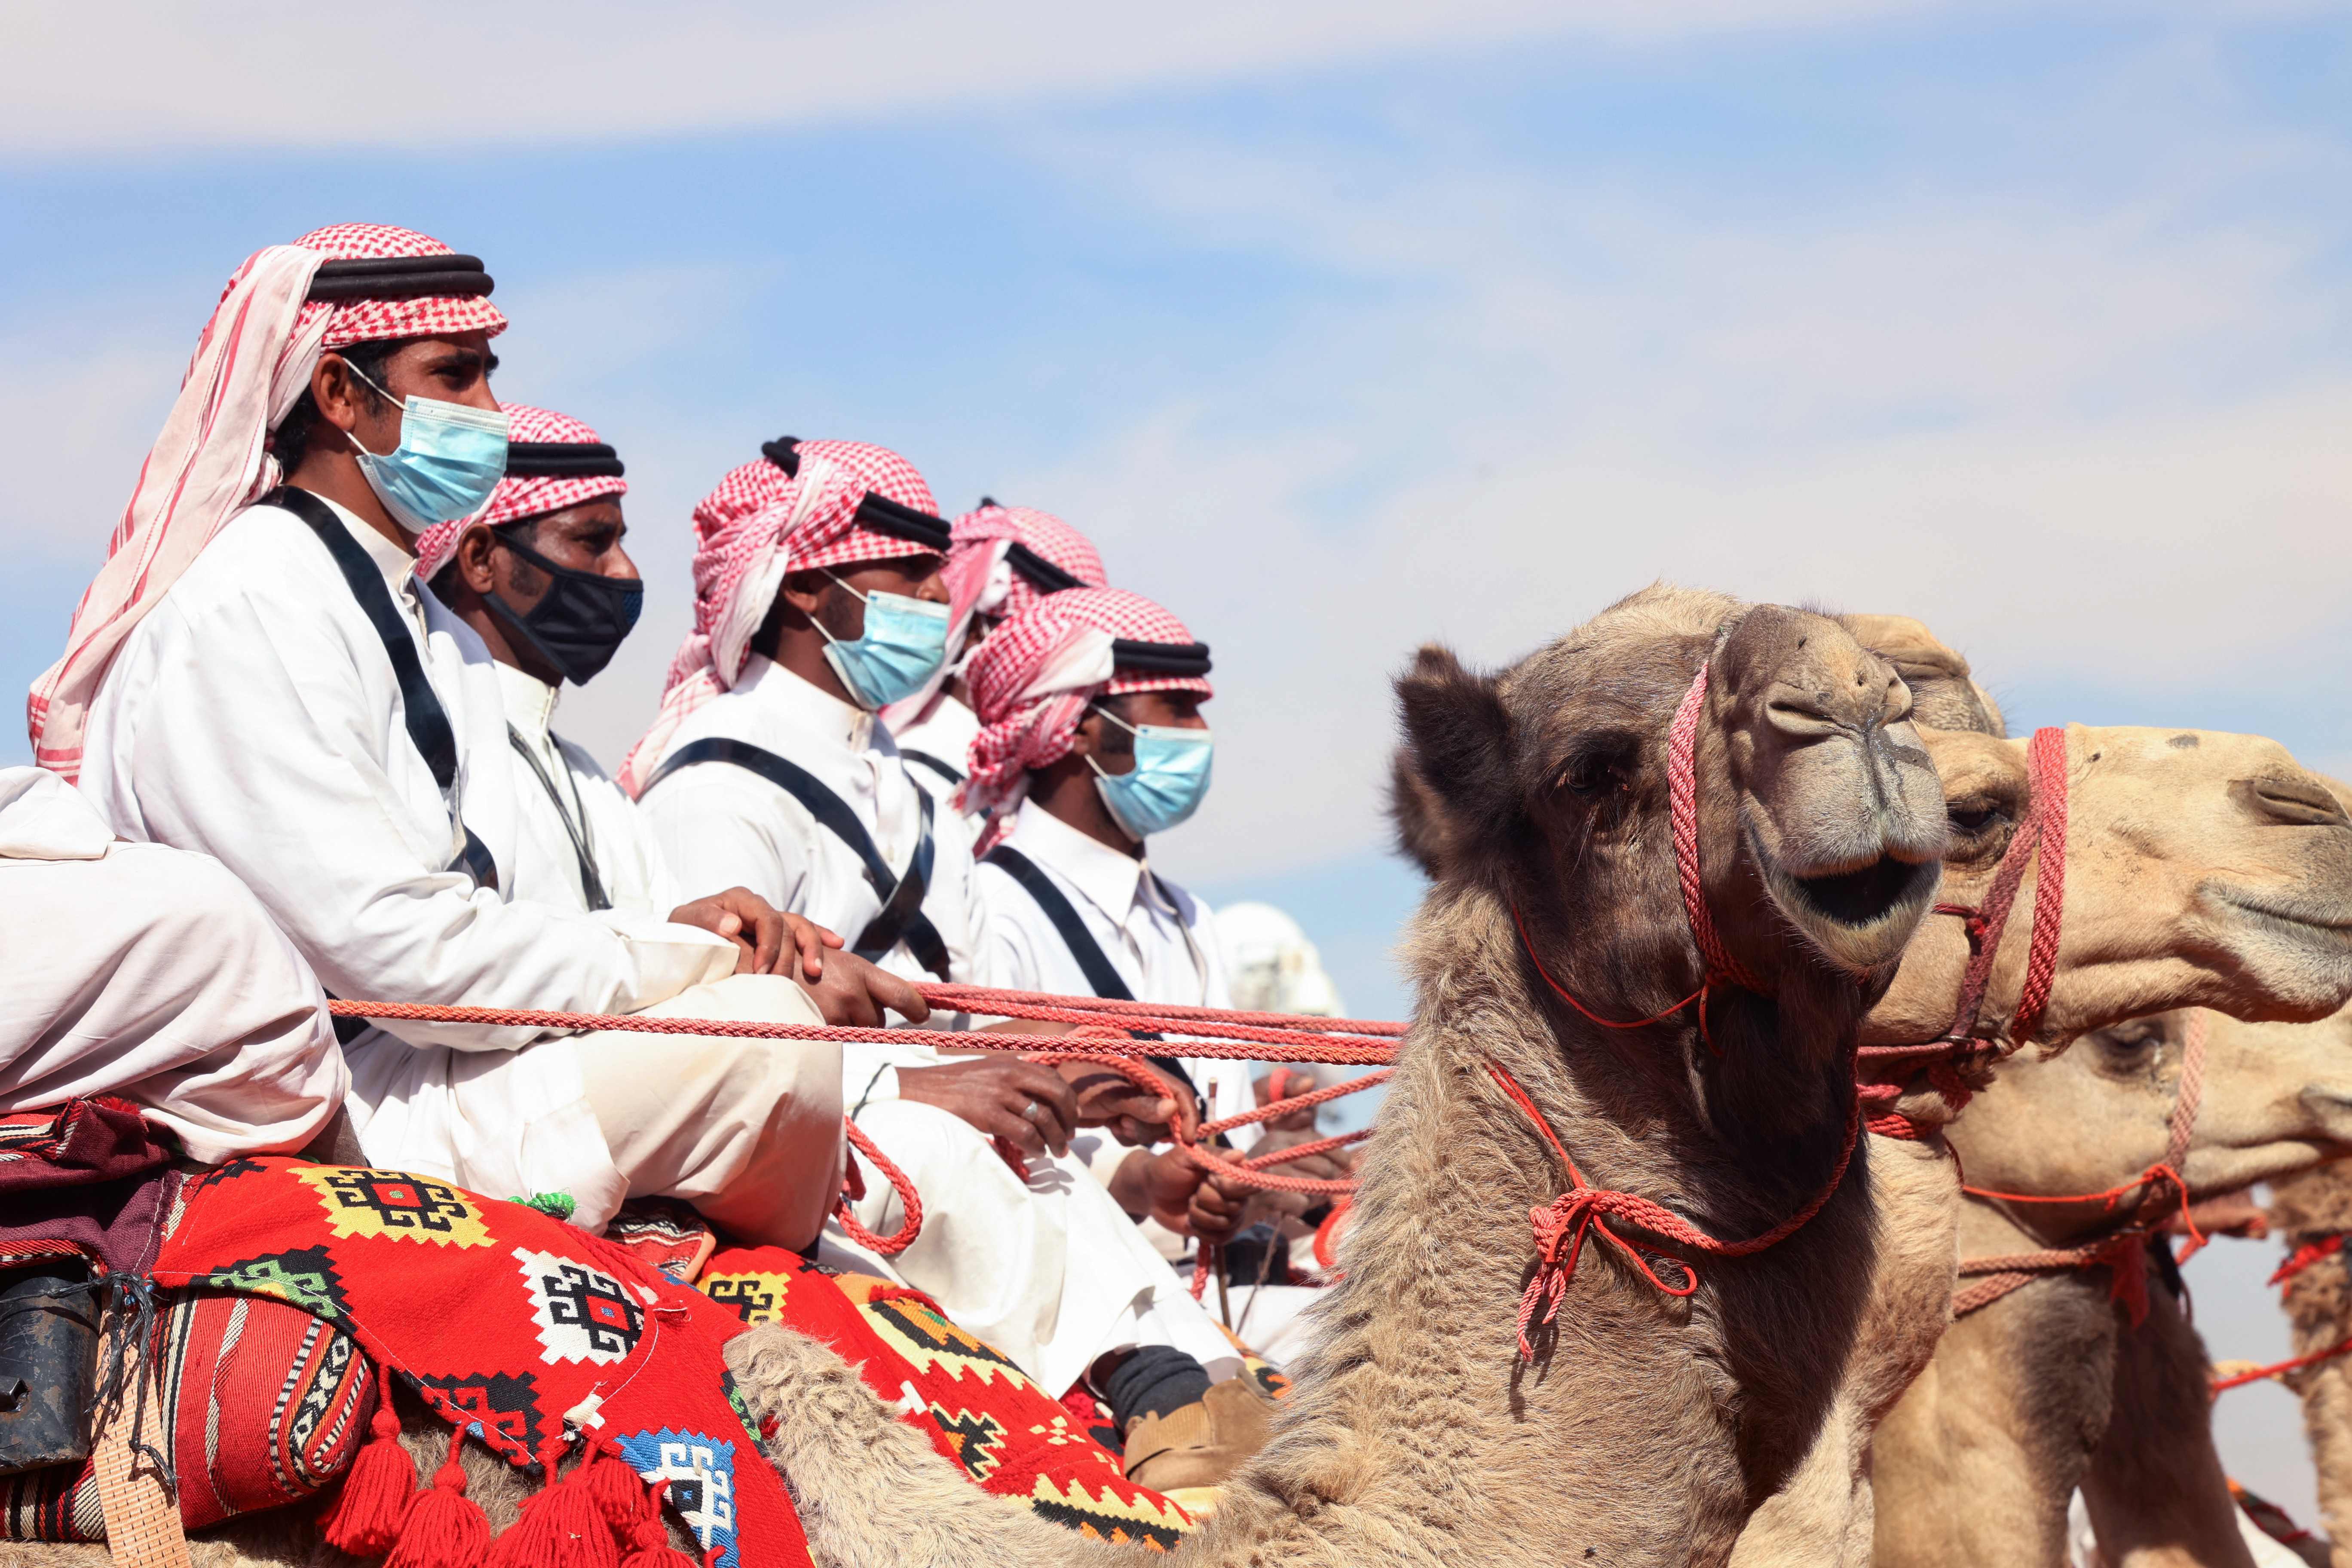 Saudi Arabia reveals world's first 'camel hotel' with full services